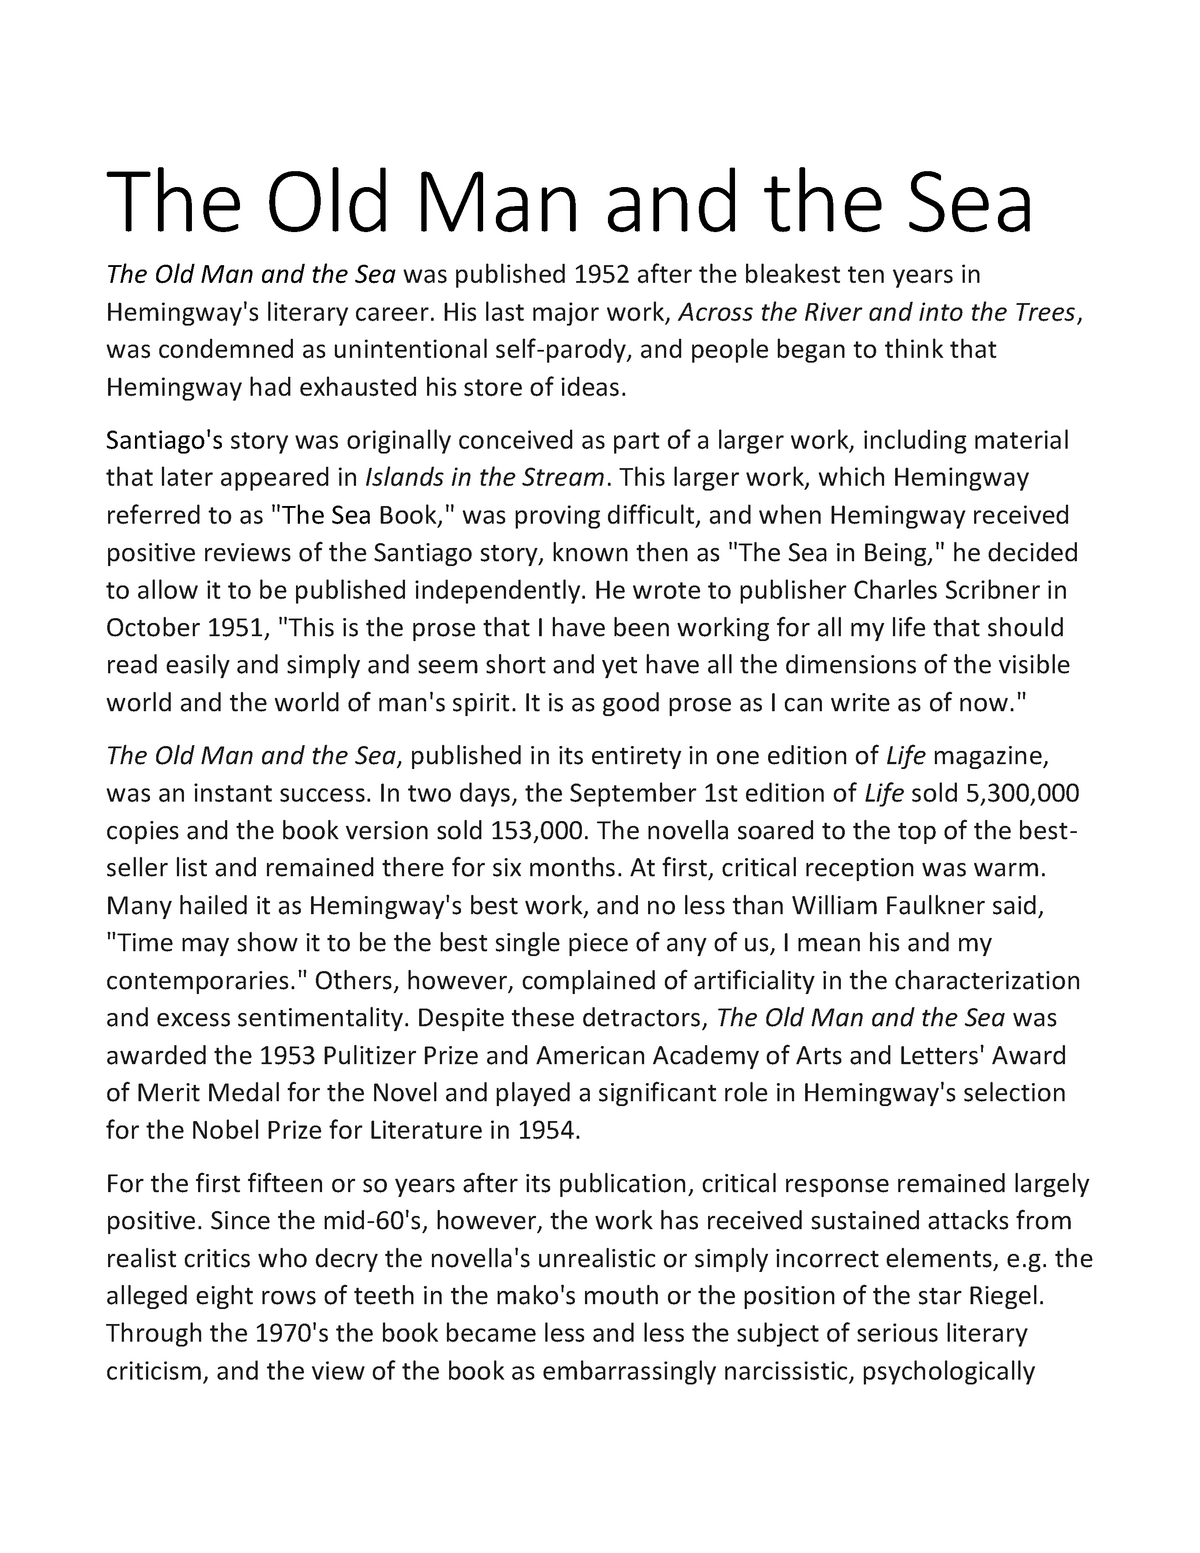 old man and the sea essay examples